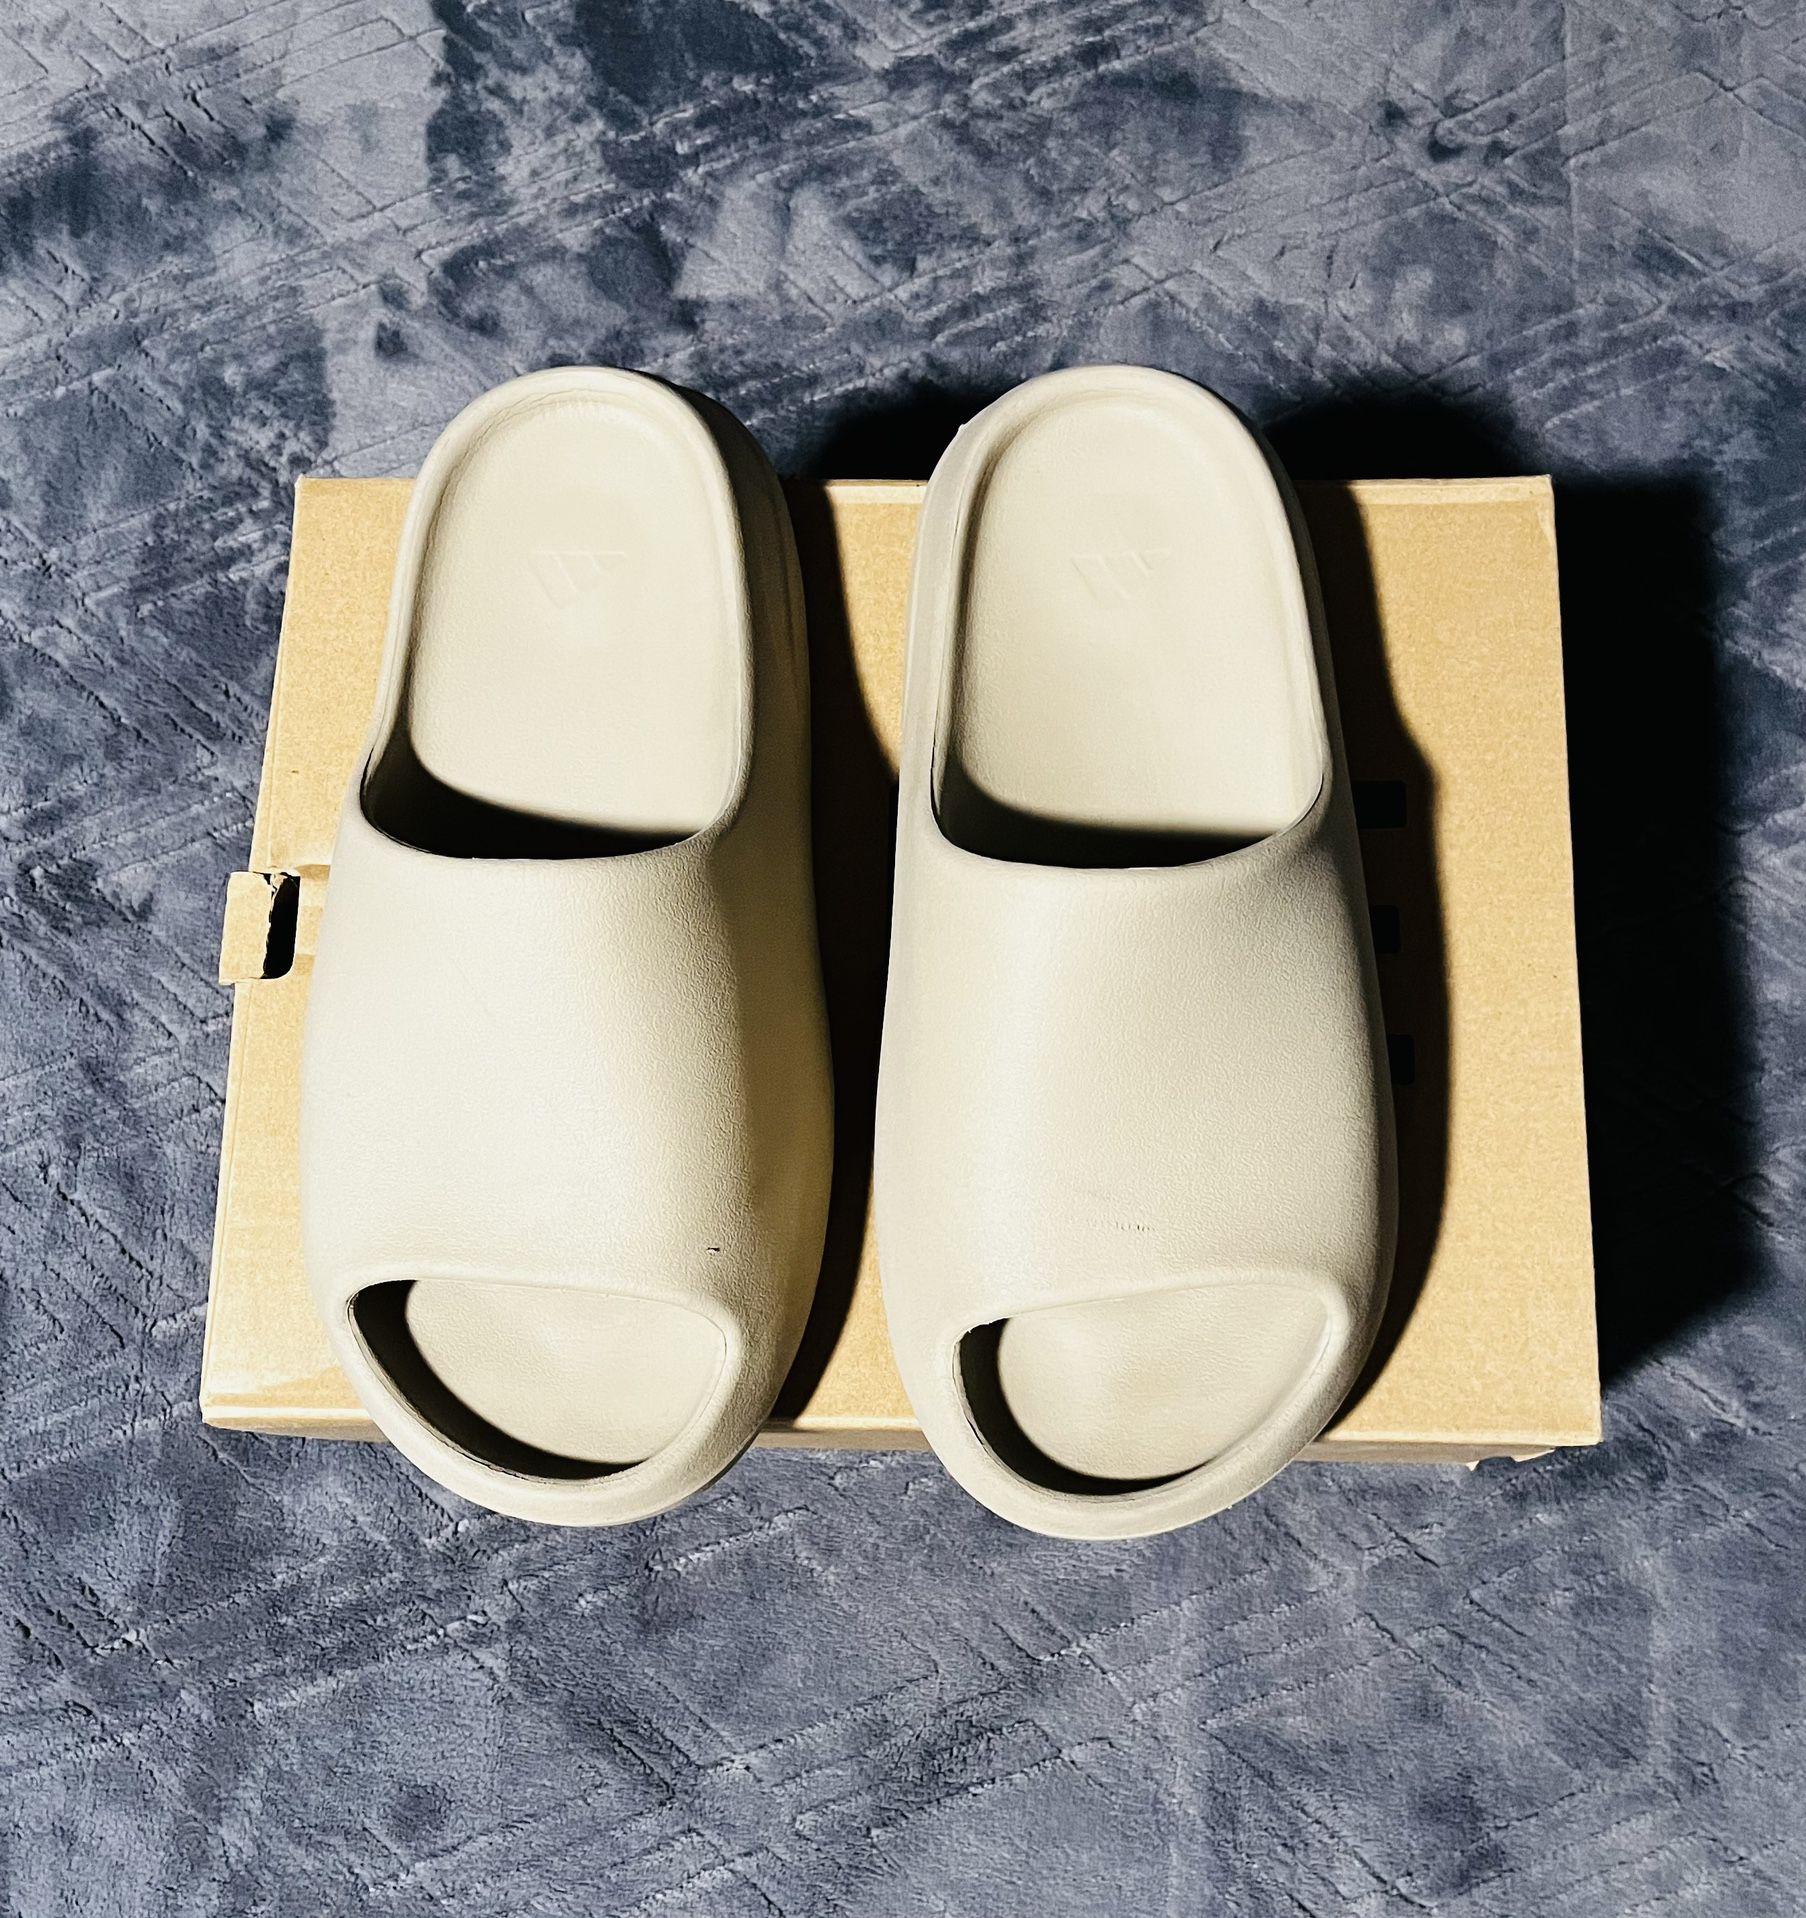 Yeezy Slides “Pure” Size 10